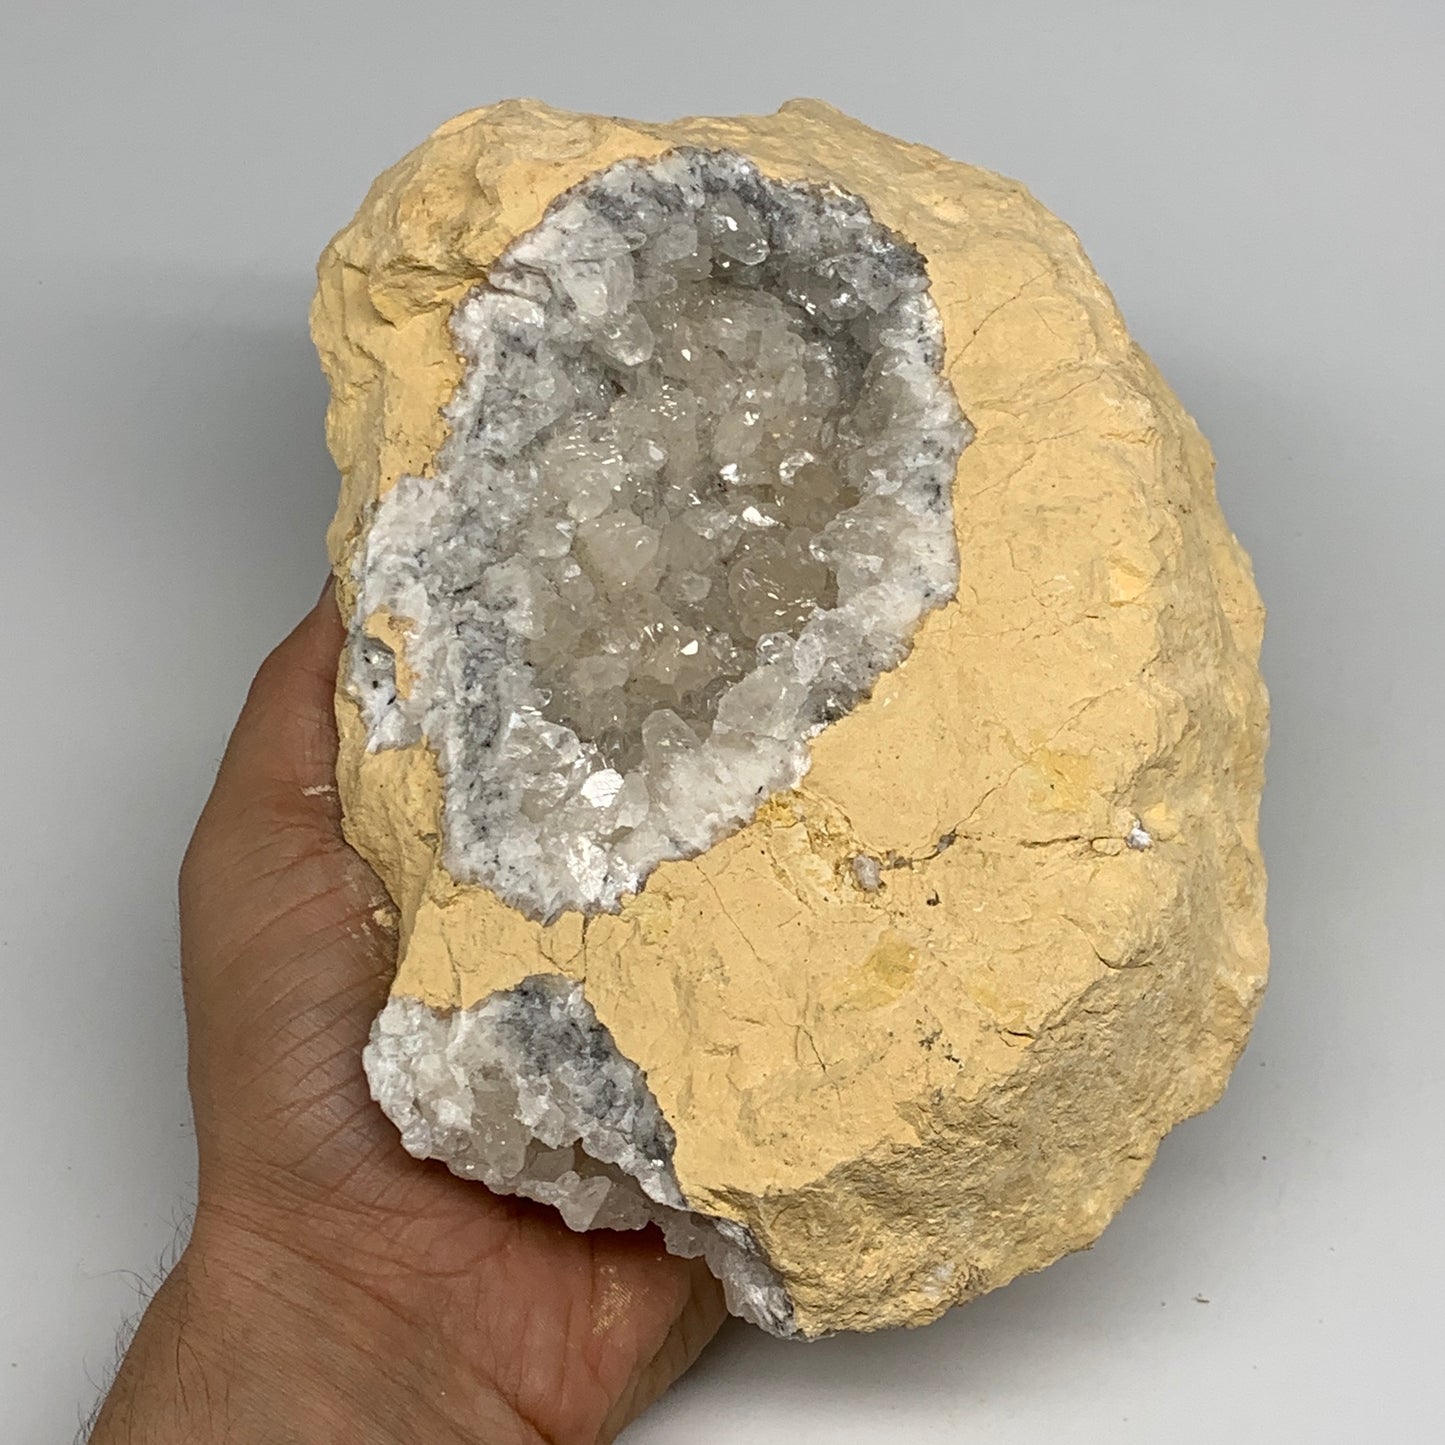 3.51 lbs, 7.5"x5.3"x2.1", Huge Calcite Geode Mineral Specimens @Morocco, B11175